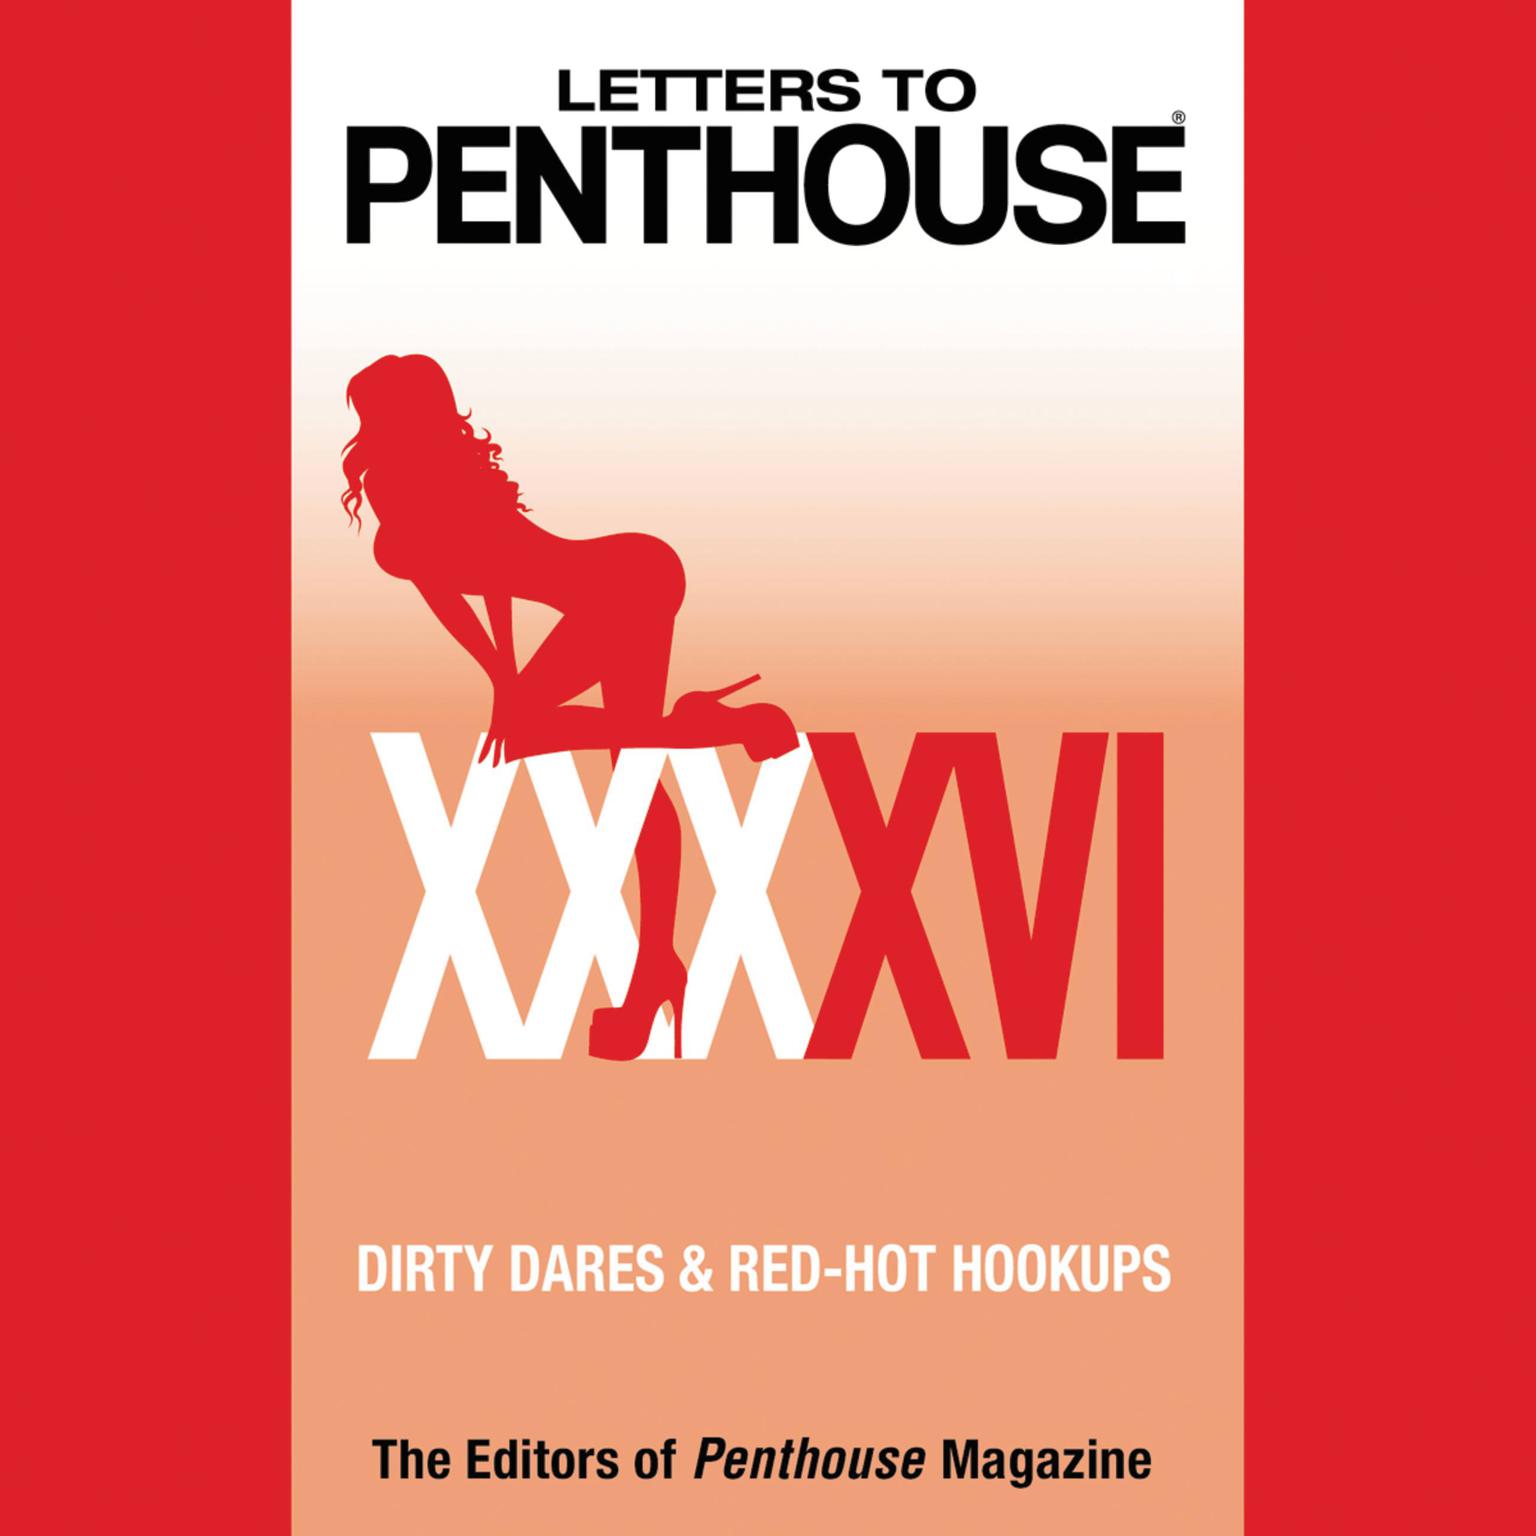 Letters to Penthouse XXXXVI: Dirty Dares & Red-Hot Hookups Audiobook, by Penthouse International